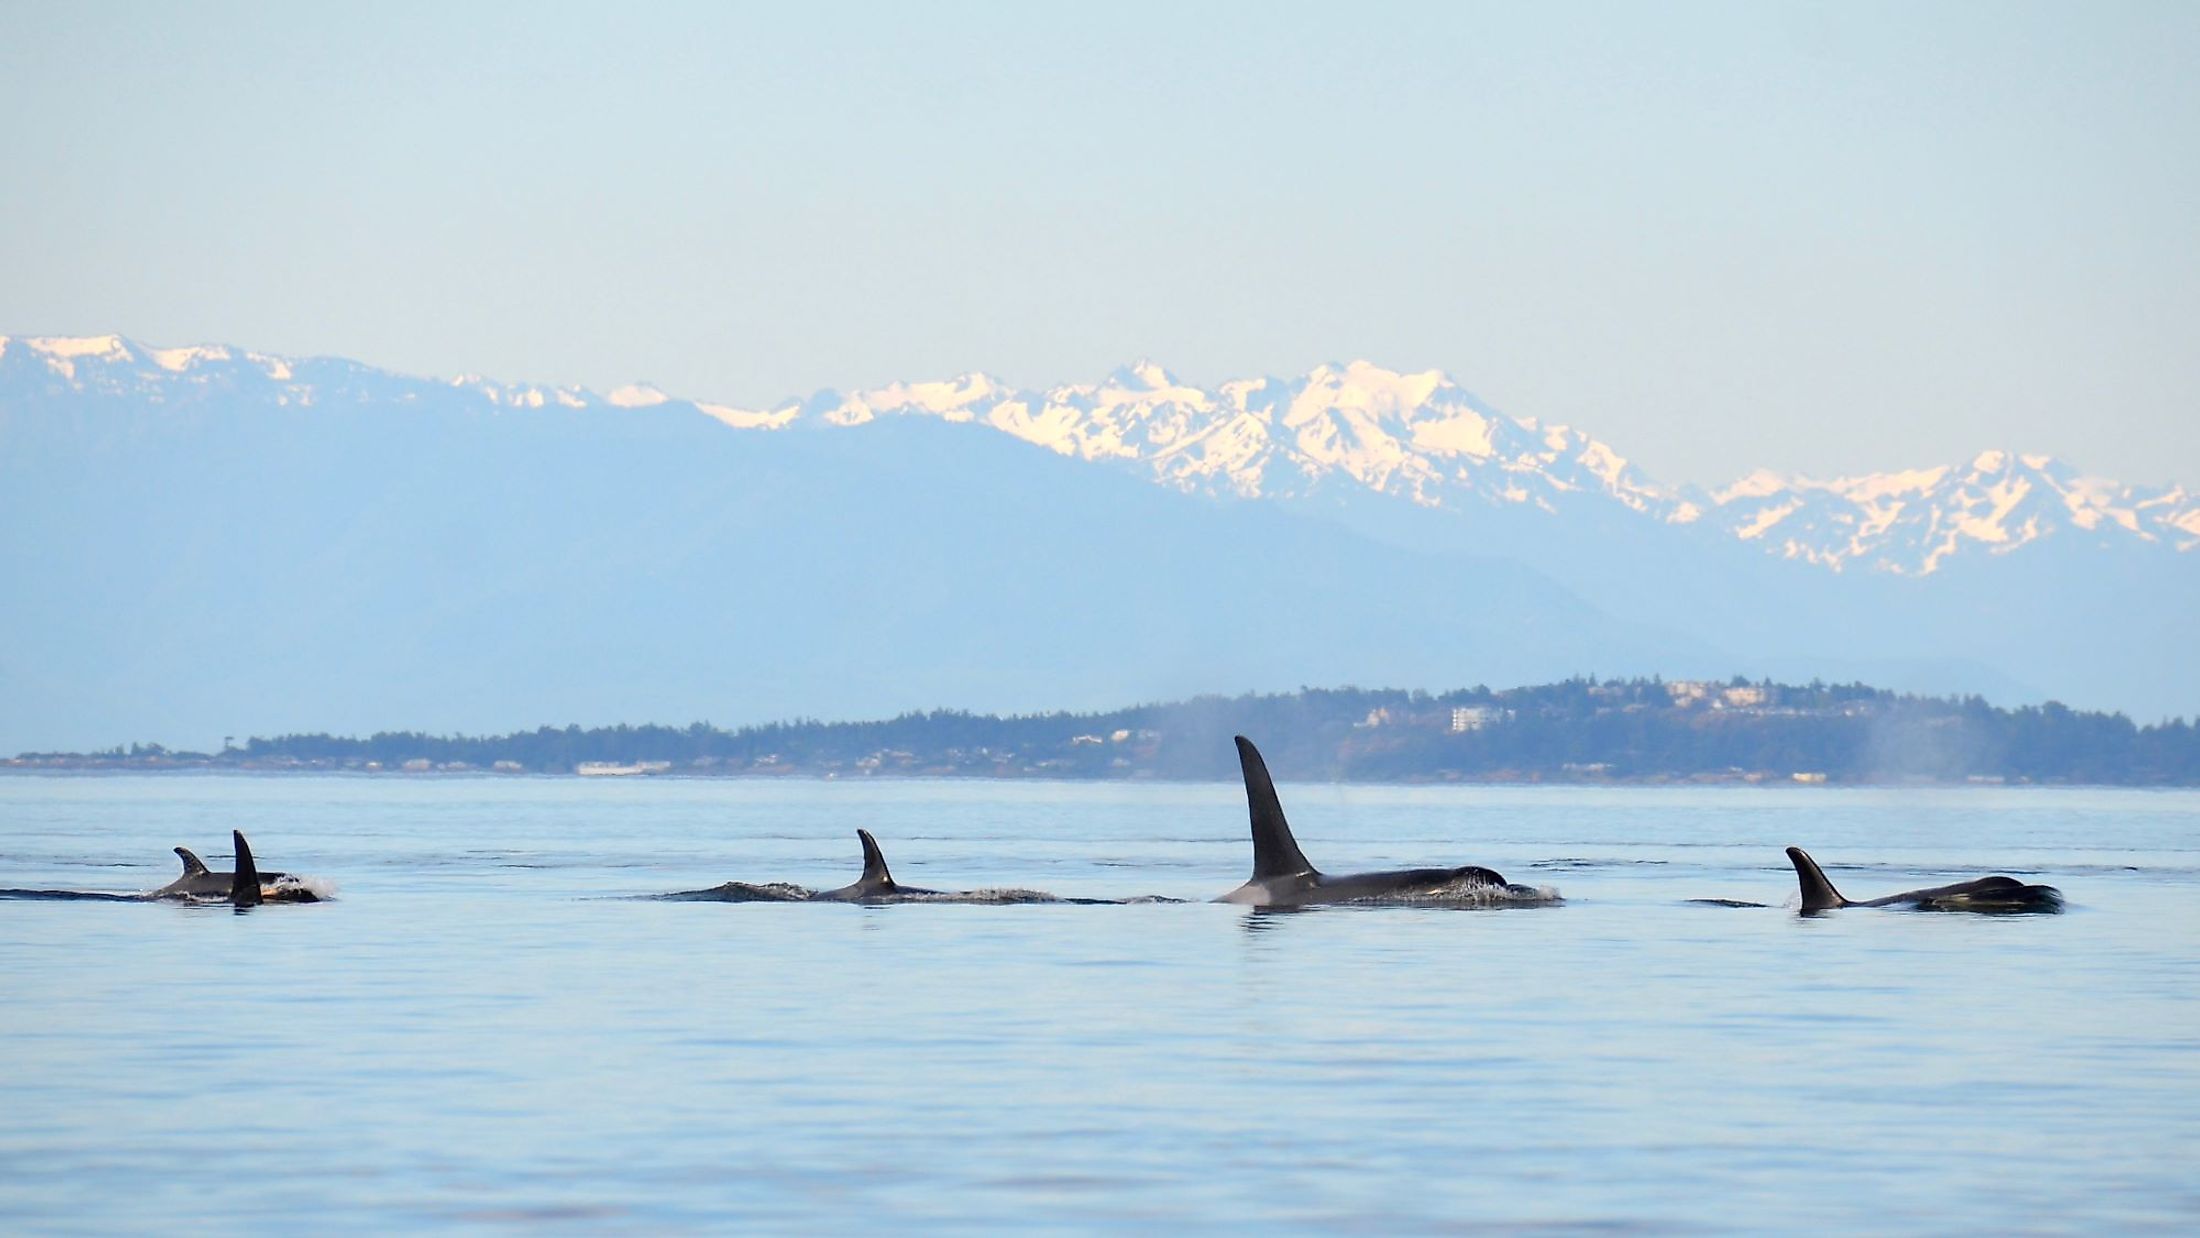 A pod of wild orcas travels north in the waters of the Salish Sea, the towering Olympic Mountains behind them.